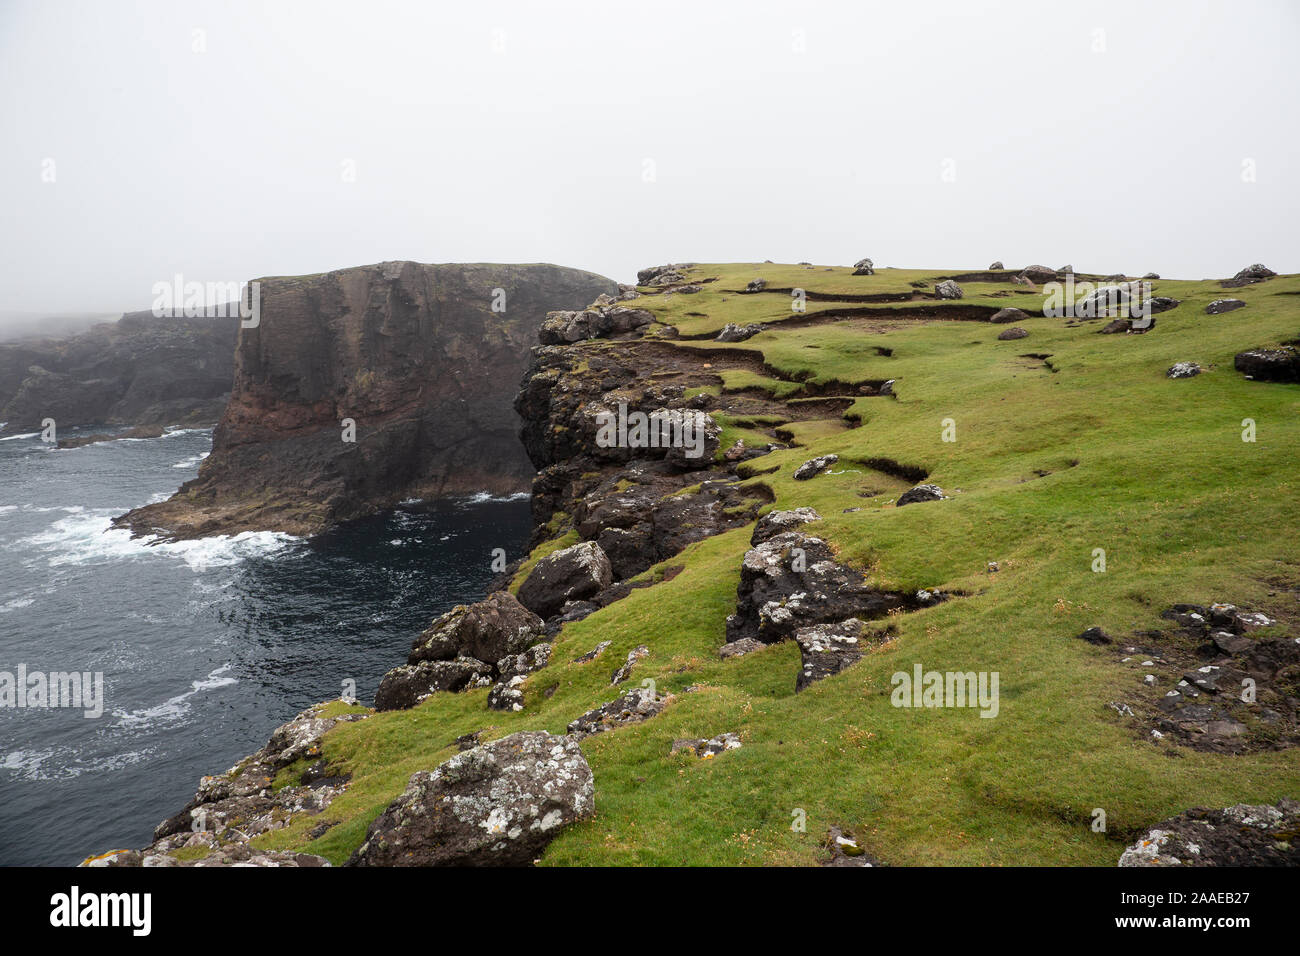 The spectacular high energy cliffs of Eshaness a peninsula on the Shetland Isles display a stunning array of stacks and geos formerly a volcano. Stock Photo